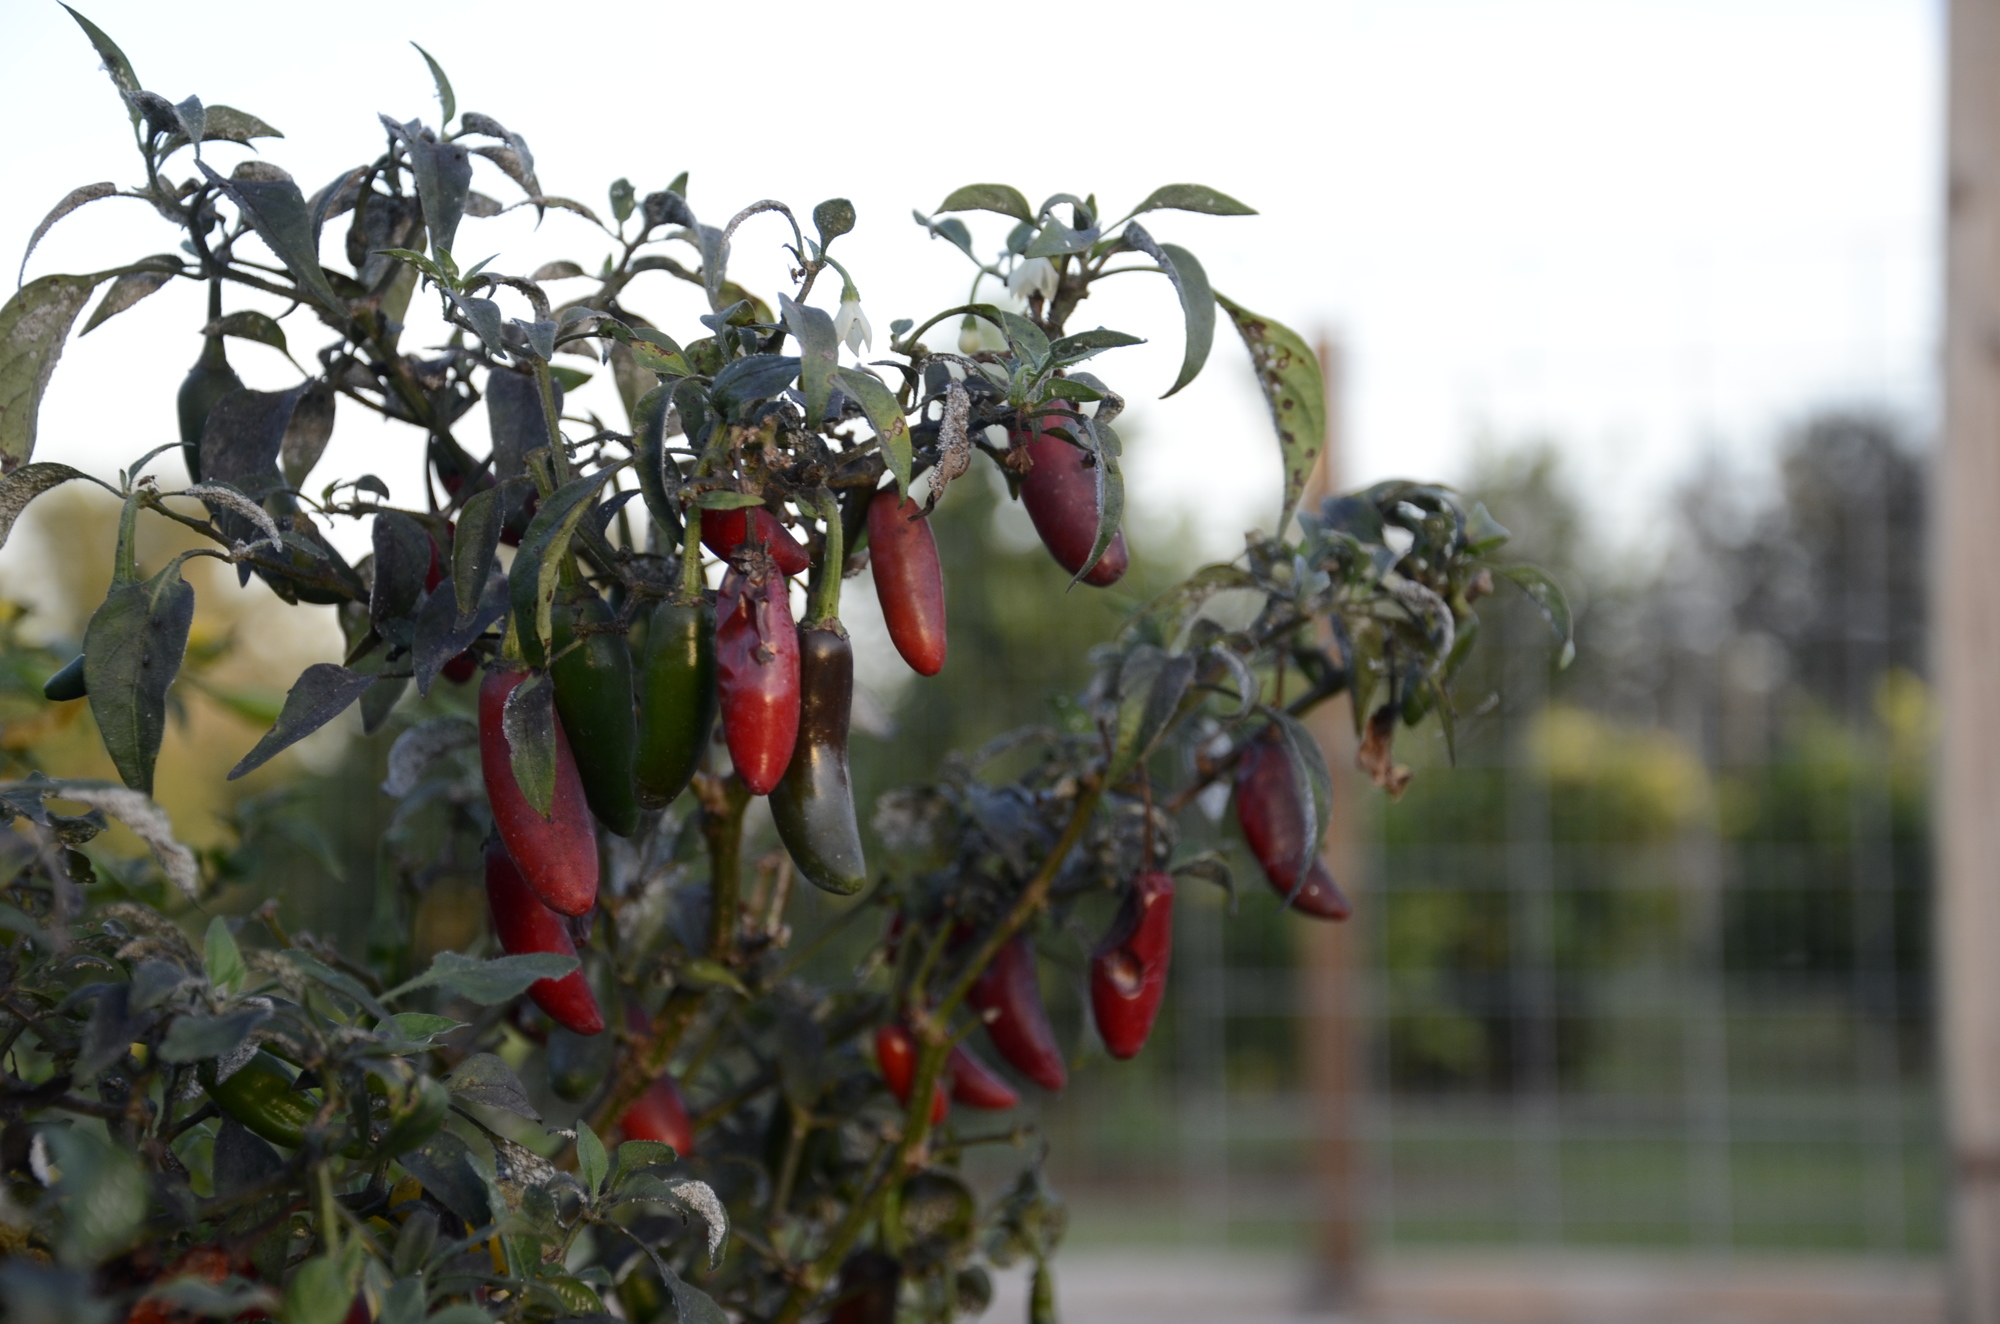 Hernandez uses red jalapeno peppers to make her tasty sriache hot sauce.